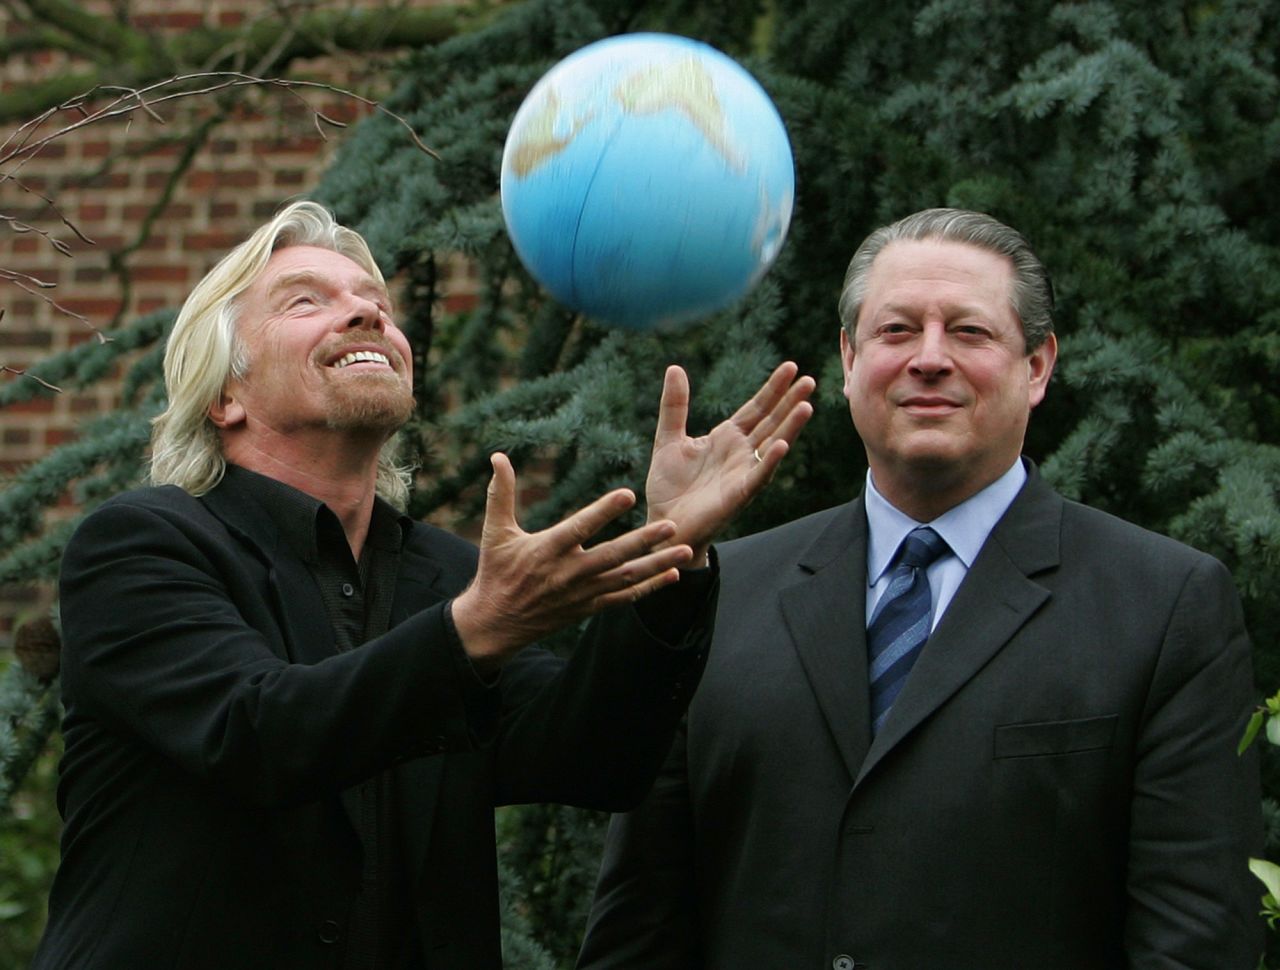 Branson and former US Vice President Al Gore announce the Virgin Earth Challenge in 2007. The Virgin Earth Challenge was a $25 million prize to be awarded to an individual or a group who could demonstrate a commercially viable design to remove greenhouse gases from the atmosphere and safely store them. The prize was never awarded, as Virgin said no entries satisfied all of the prize criteria, and the challenge is no longer active.